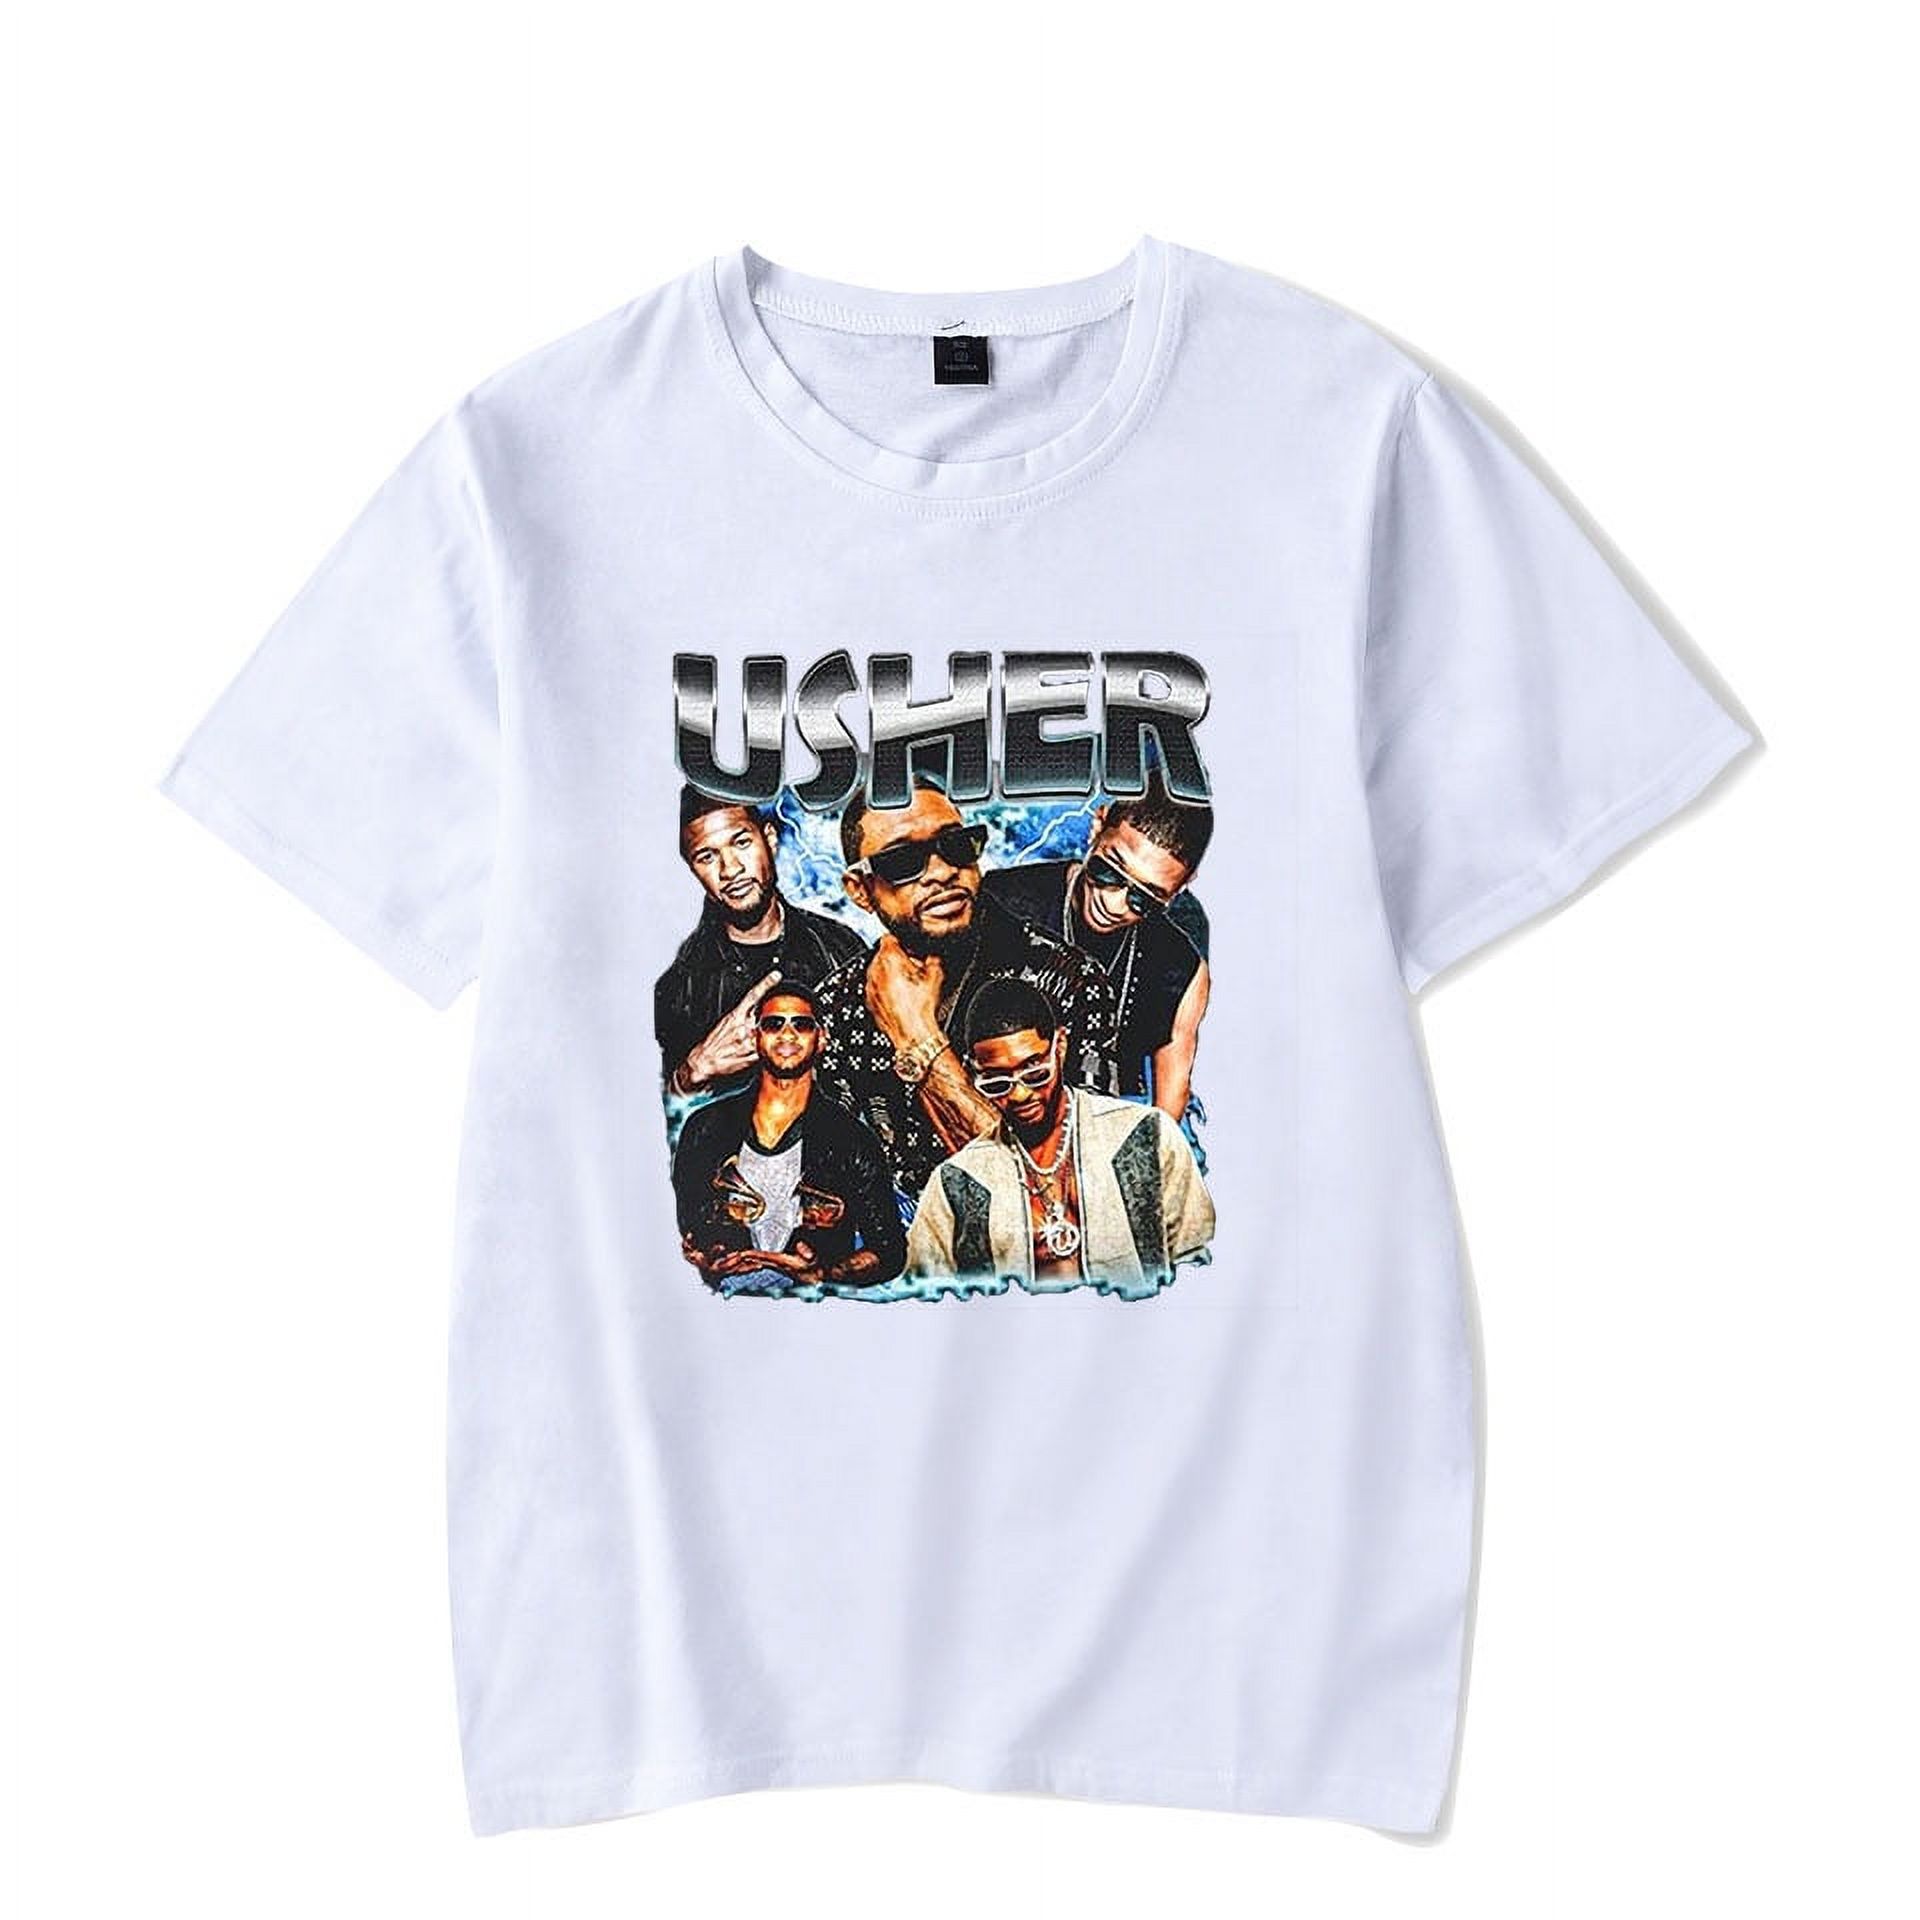 Usher Rapper Bootleg Shirt Retro Usher Graphic Tee For Fan Merch Unisex Trend Casual Top - image 5 of 6